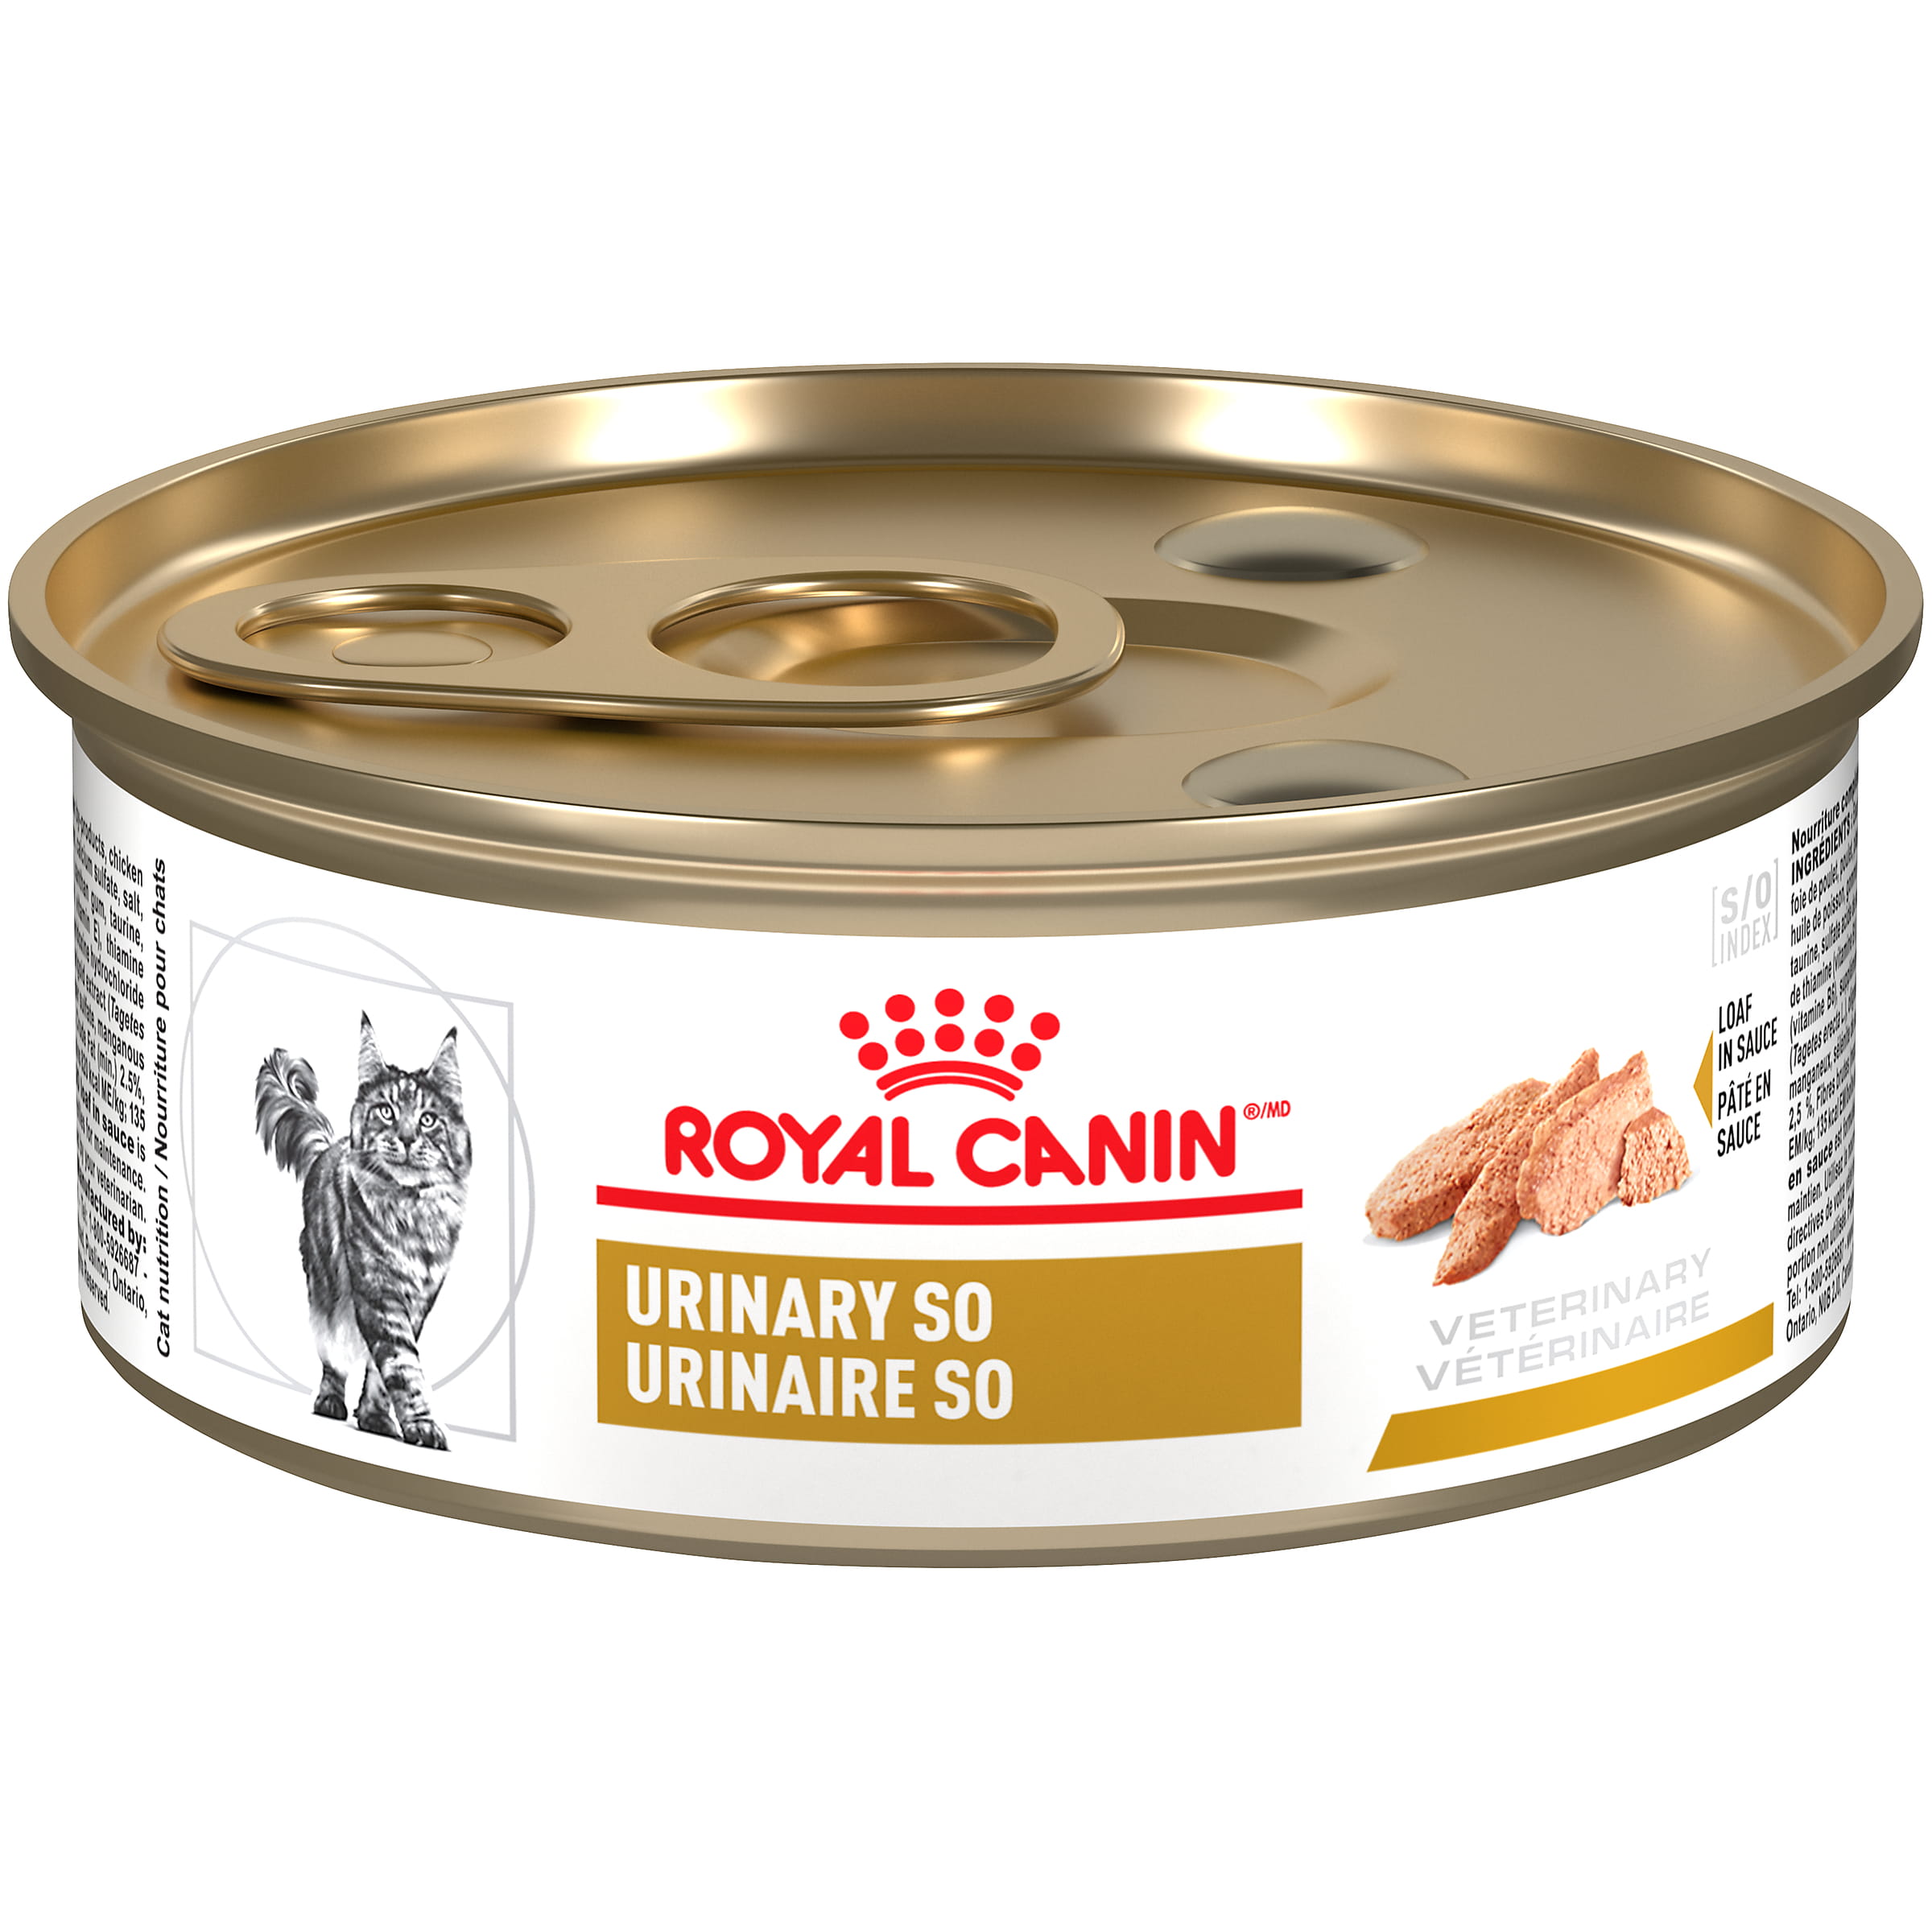 Royal Canin Hp Cat Food Canned